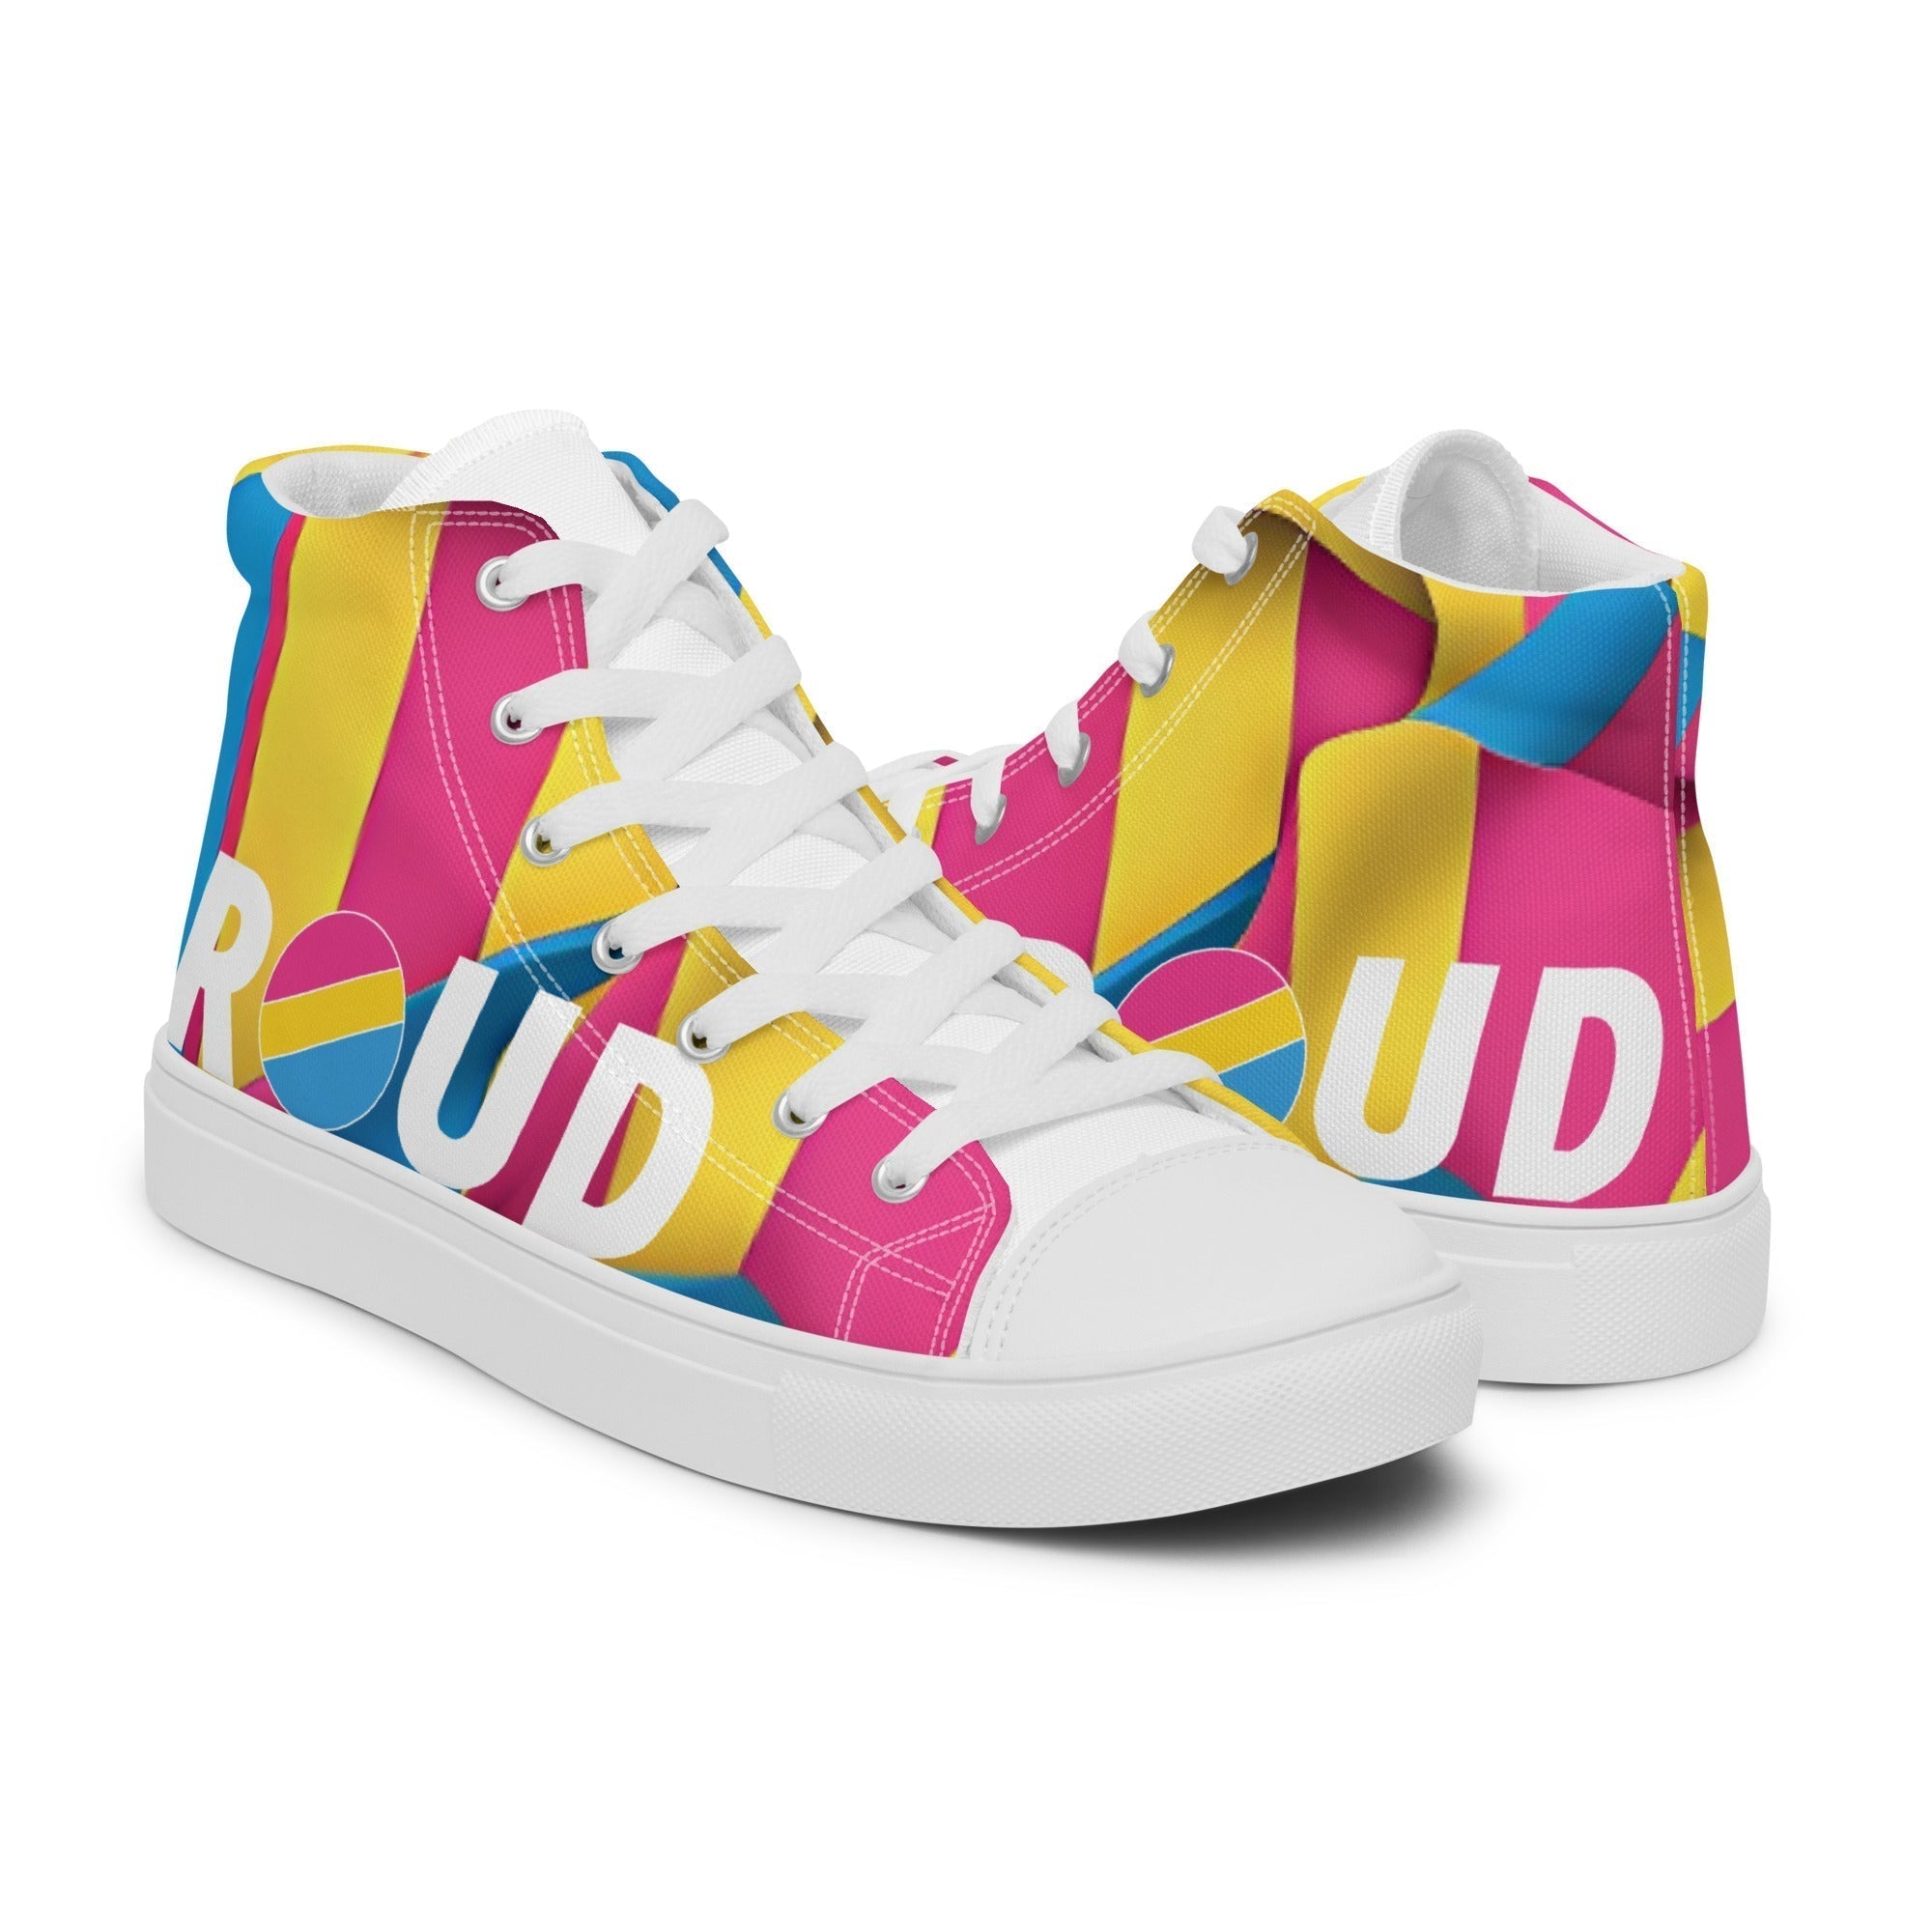 PROUD Pansexual Shoes